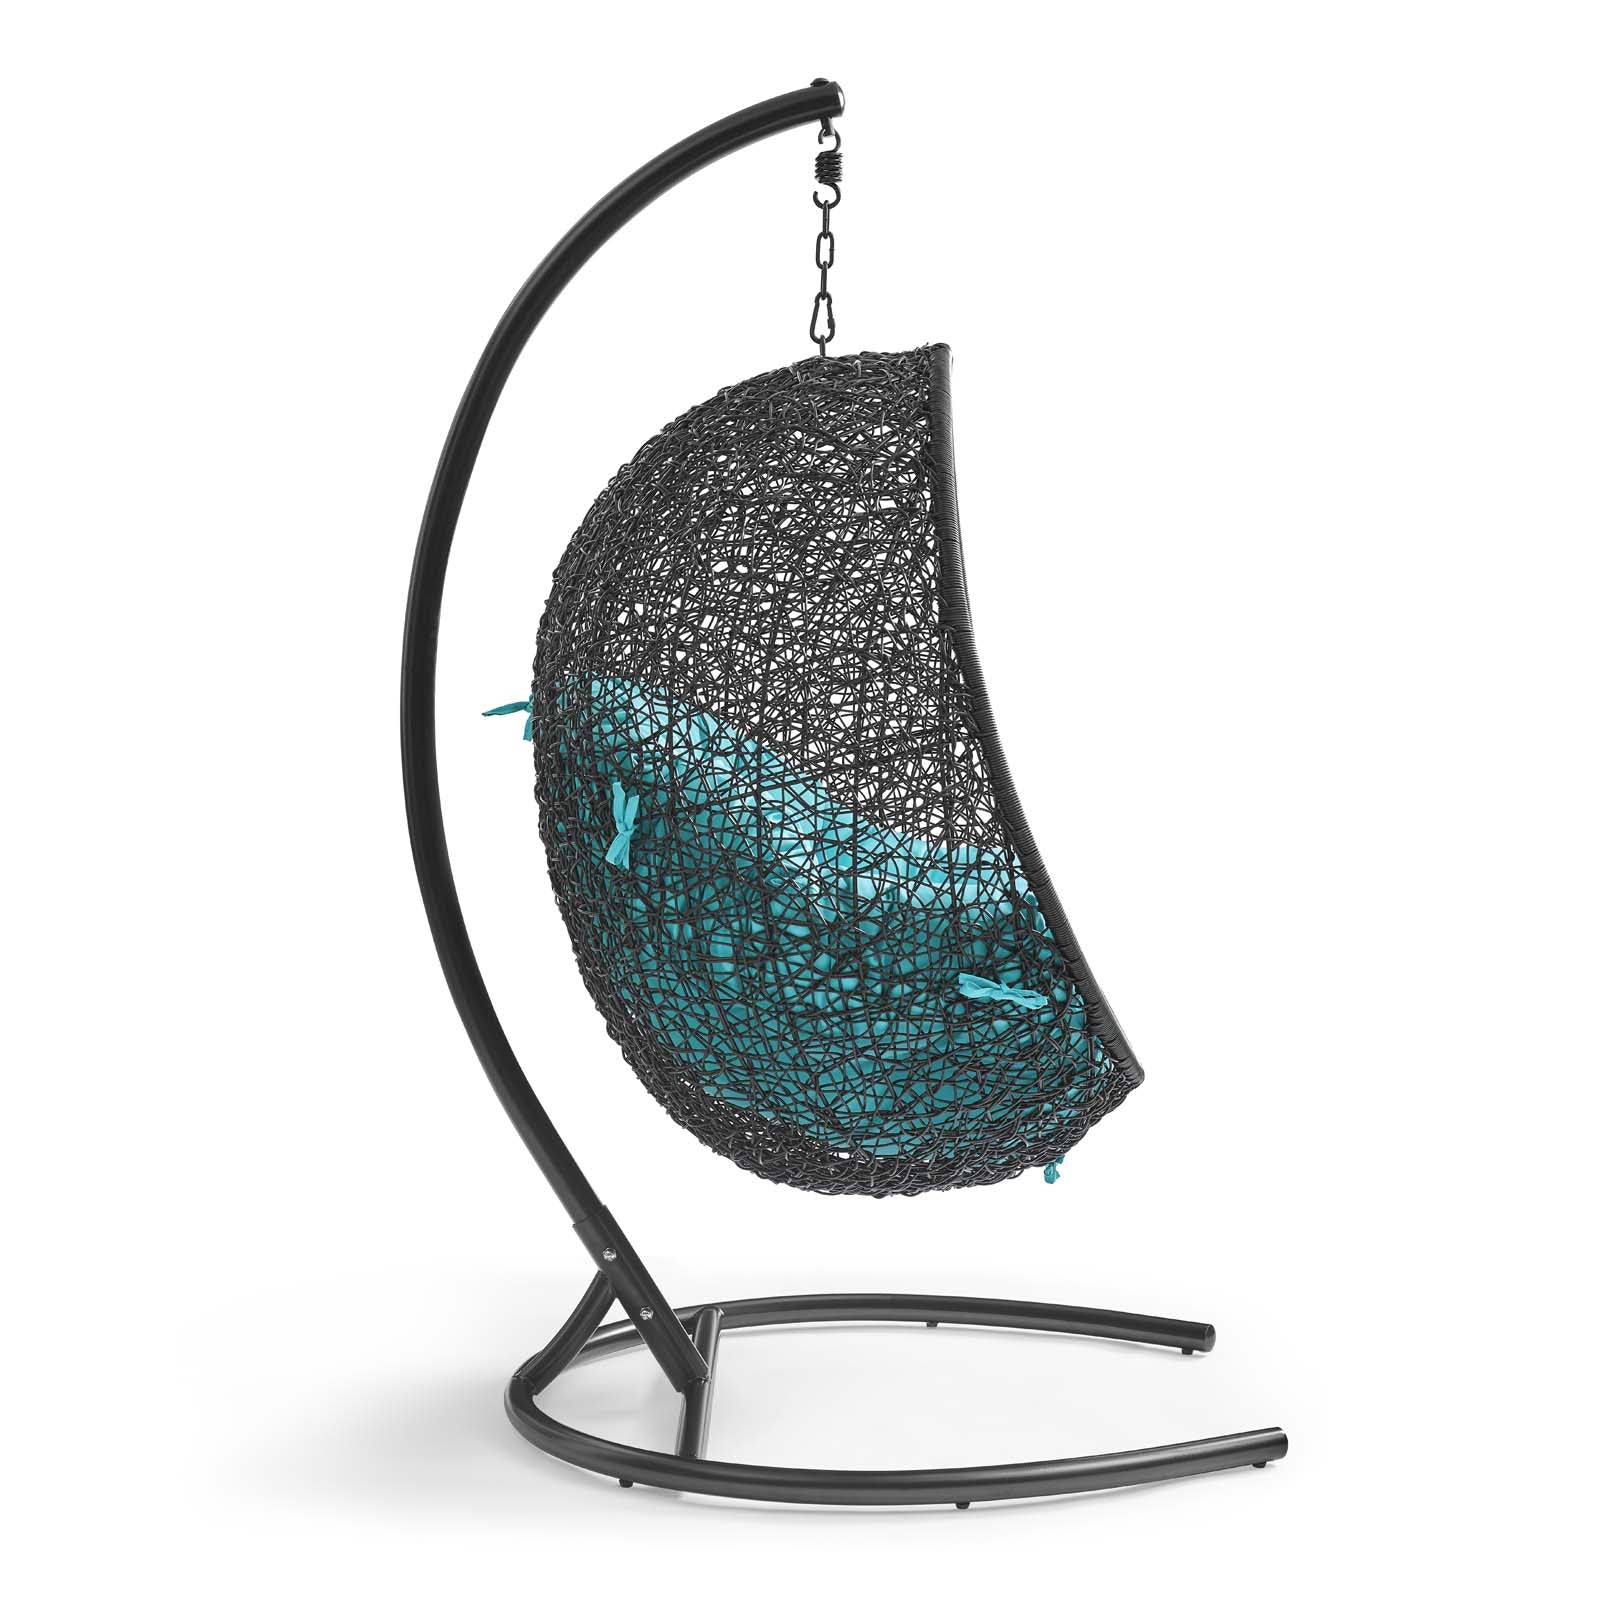 Modway Outdoor Swings - Encase Swing Outdoor Patio Lounge Chair Turquoise